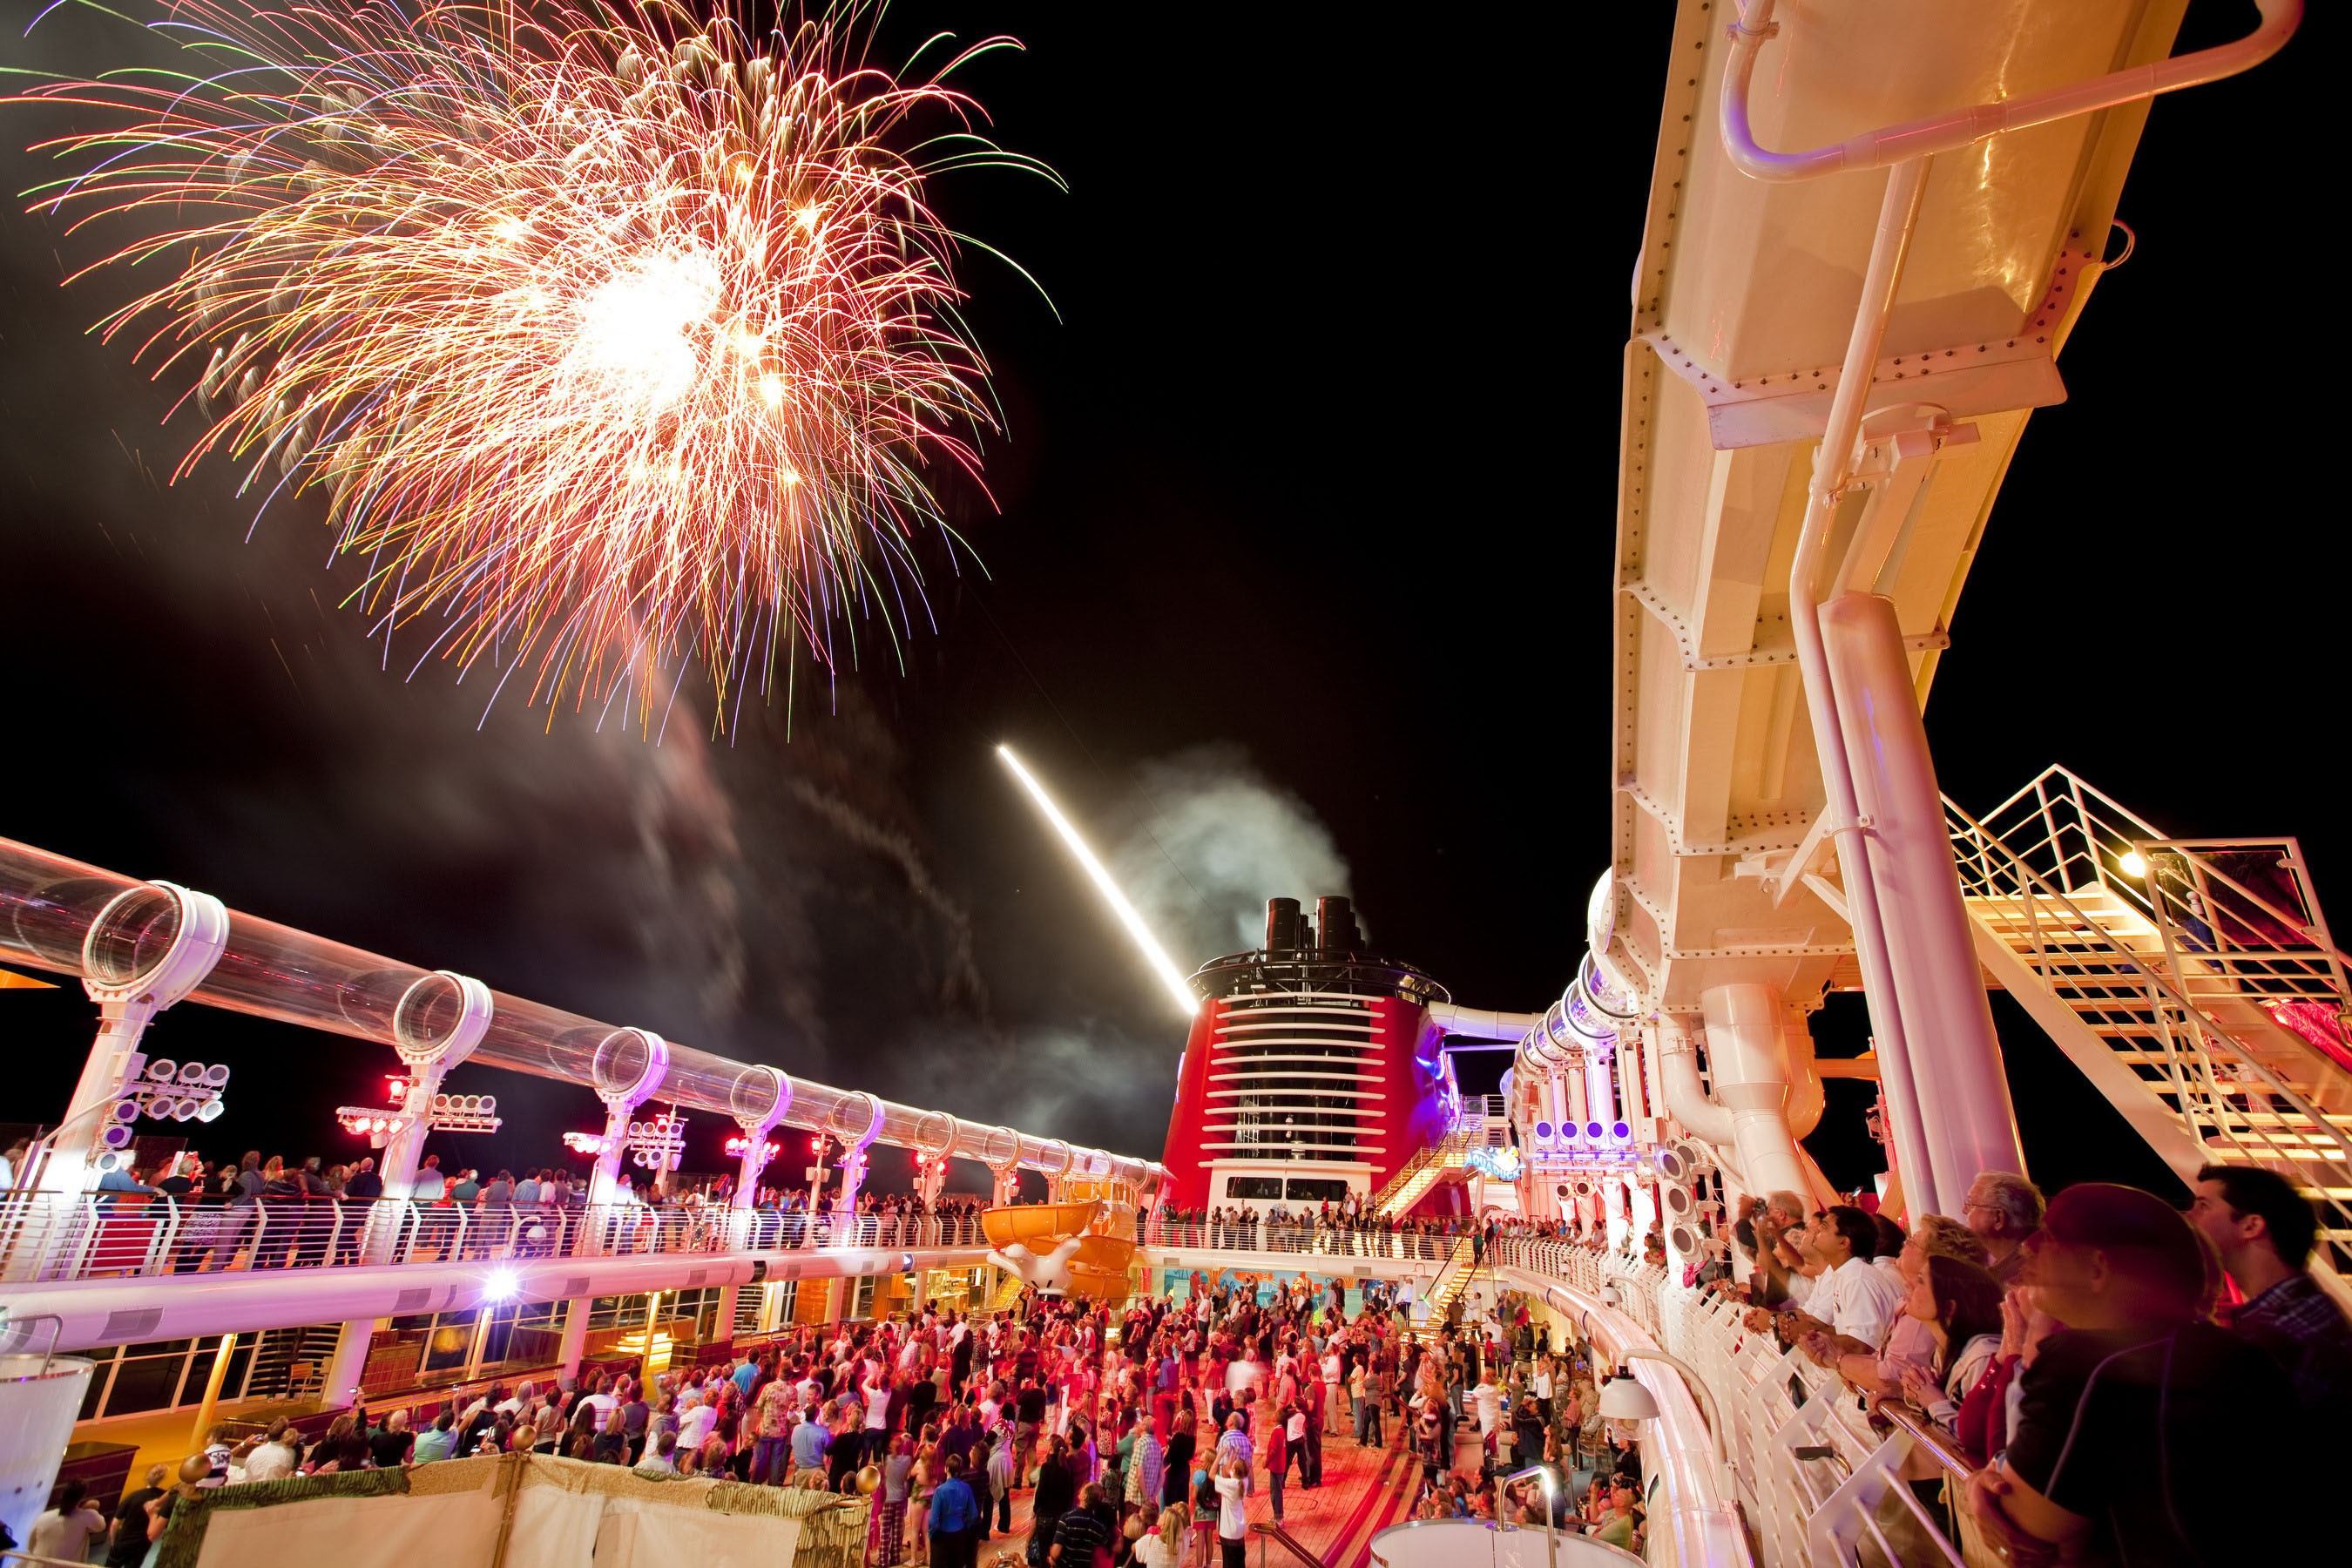 As the only cruise line to feature fireworks at sea, Disney Cruise Line lights up the sky to dazzle guests with the largest, awe-inspiring fireworks extravaganza presented aboard a cruise ship. The skies above the Disney Dream explode with brilliant color (Foto: Matt Stroshane, photographer)